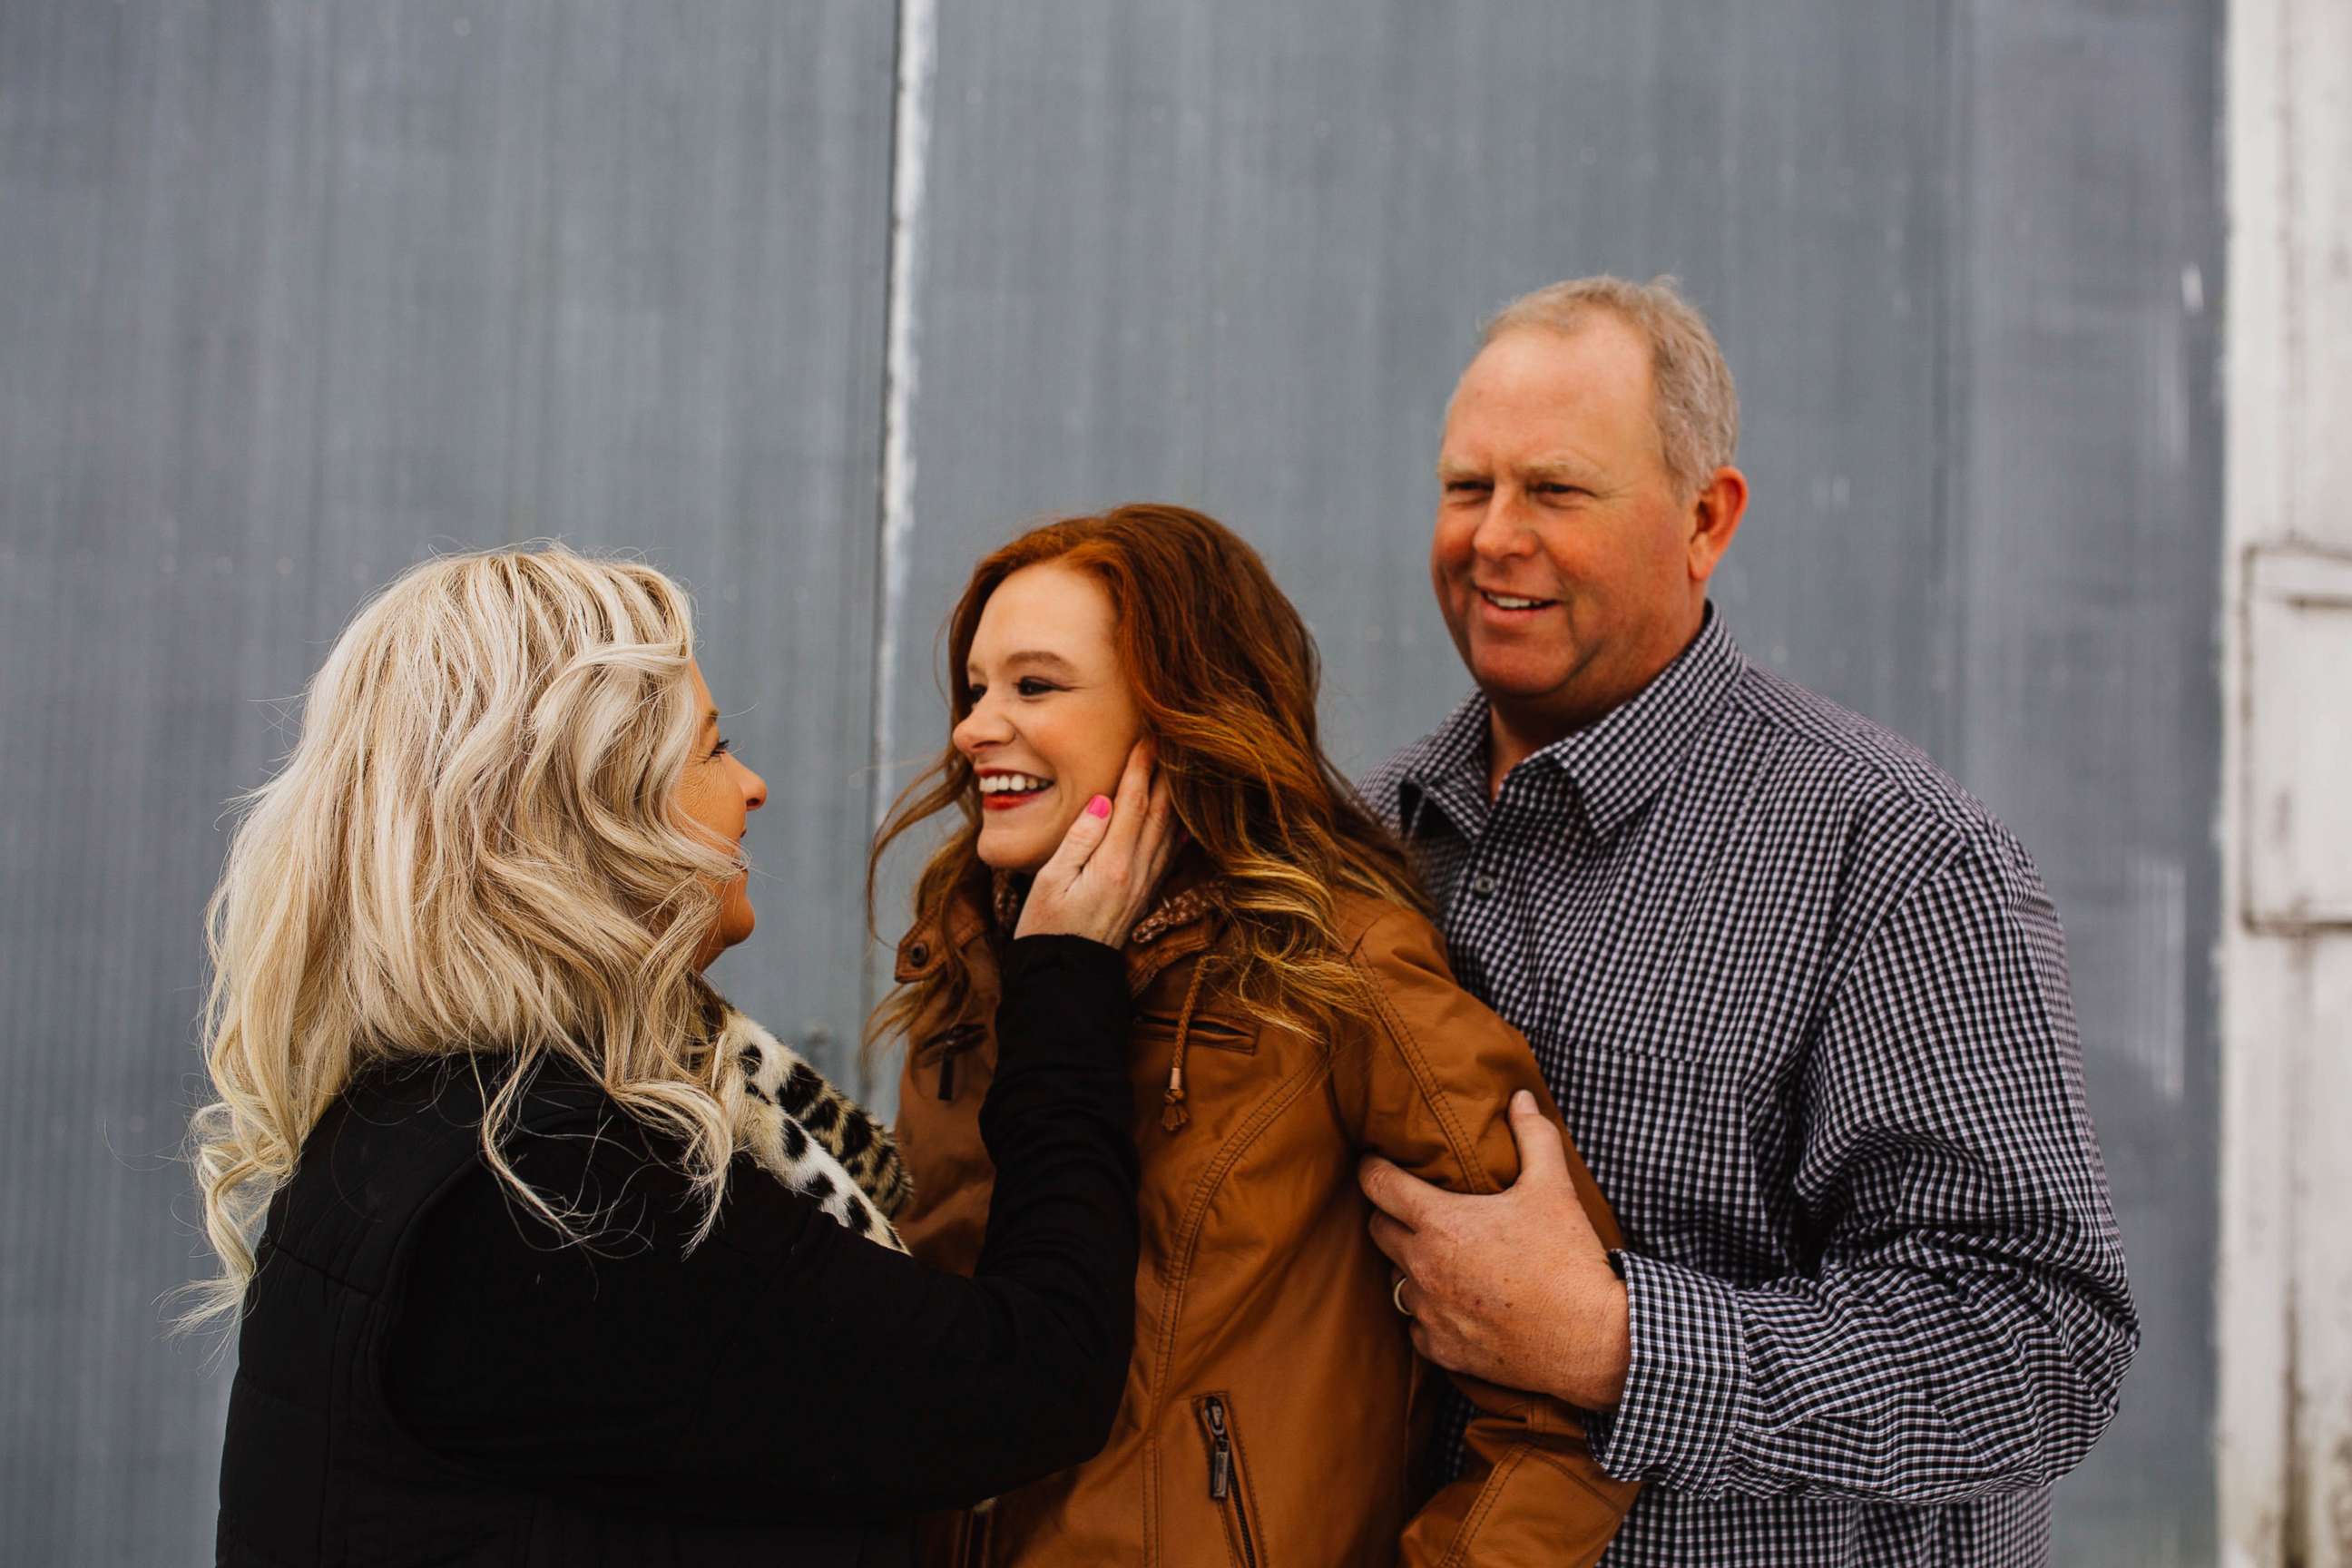 PHOTO: Jaci Hermstad, 25, is pictured with her parents, Lori and Jeff, in Webb, Iowa, March 2019.